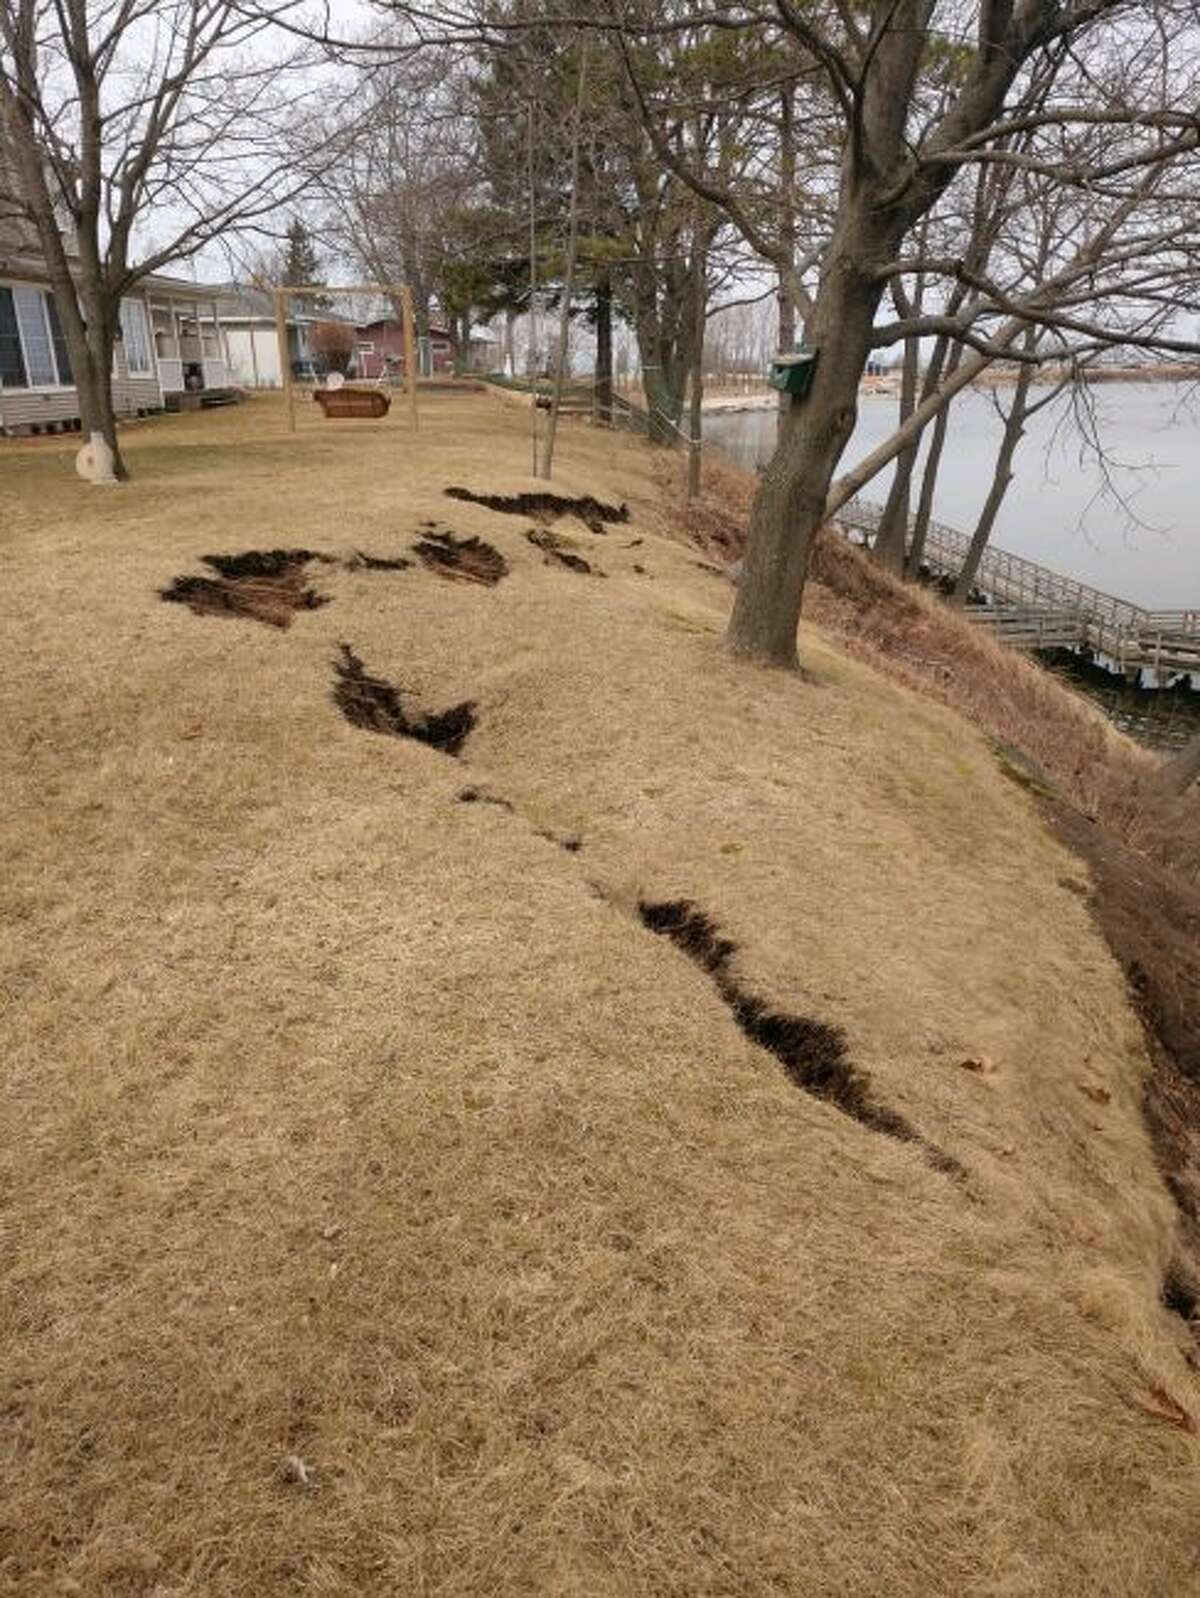 The city owns riverfront property upstream alongside private residential lots, beginning at the top of the bank. They have been alerted to recent severe erosion in this area. (Courtesy Photo/Jeff Mikula)